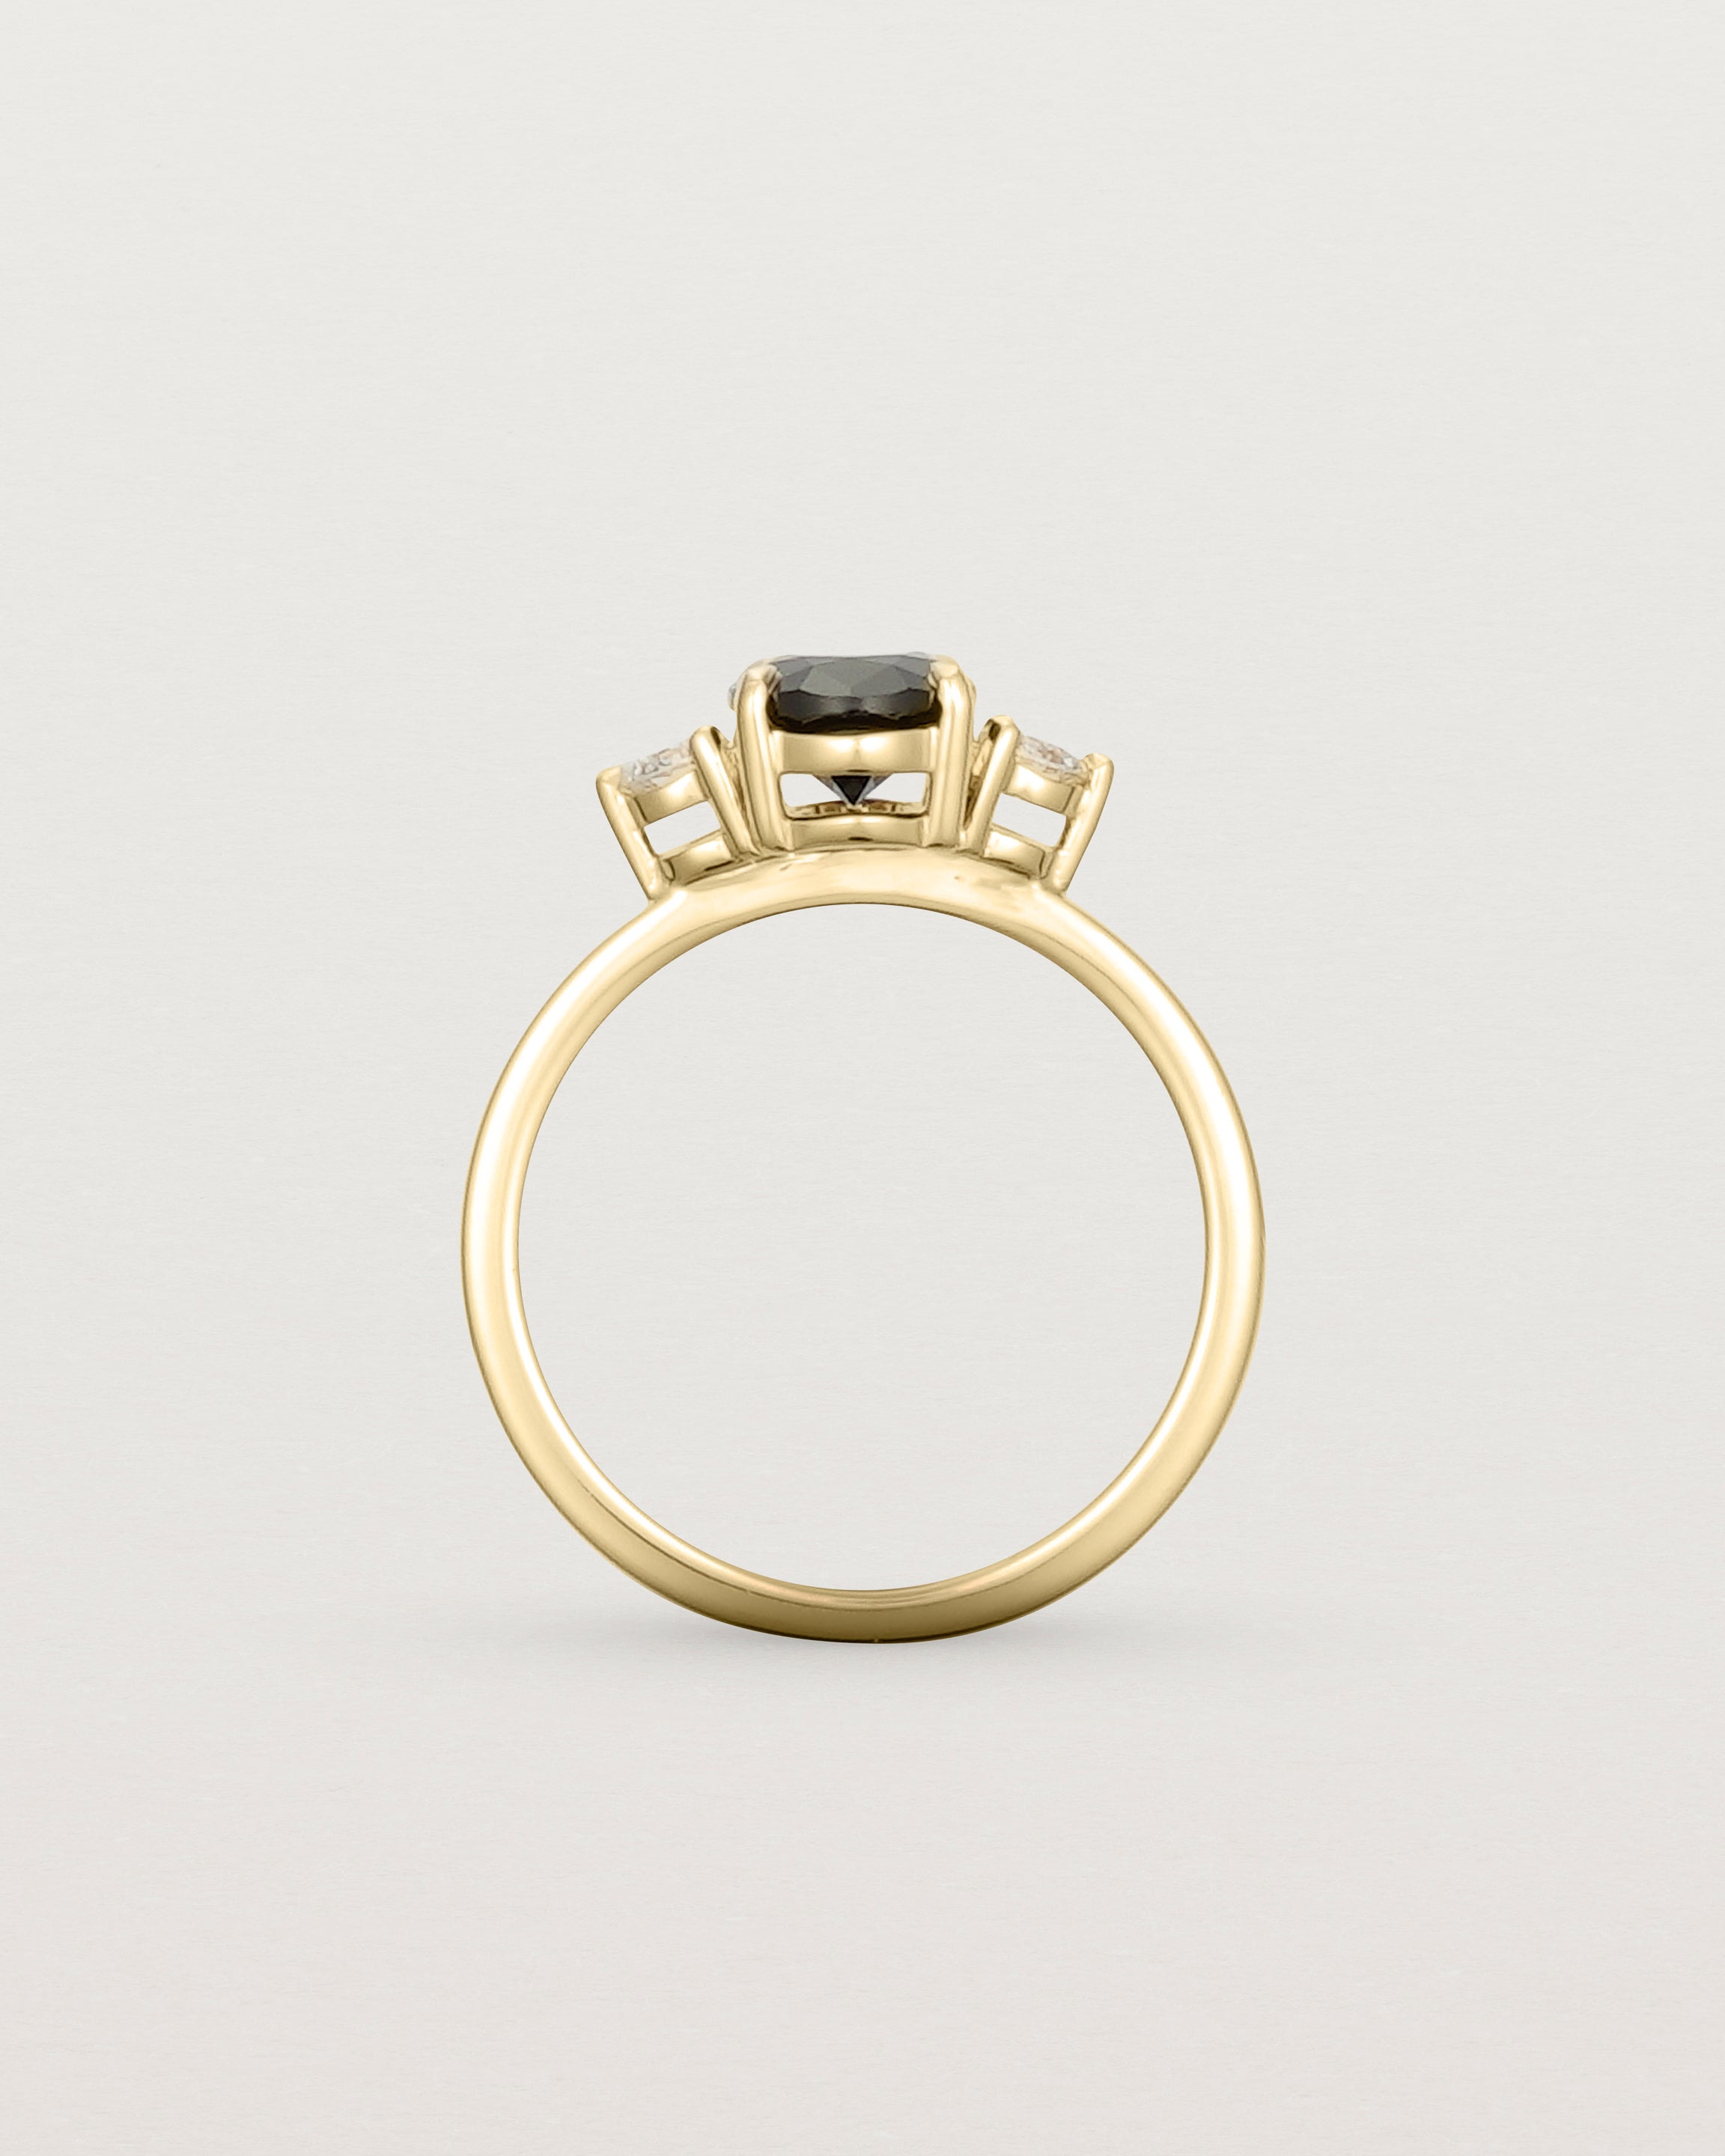 Standing view of the Una Oval Trio Ring | Black Spinel & Diamonds | Yellow Gold.